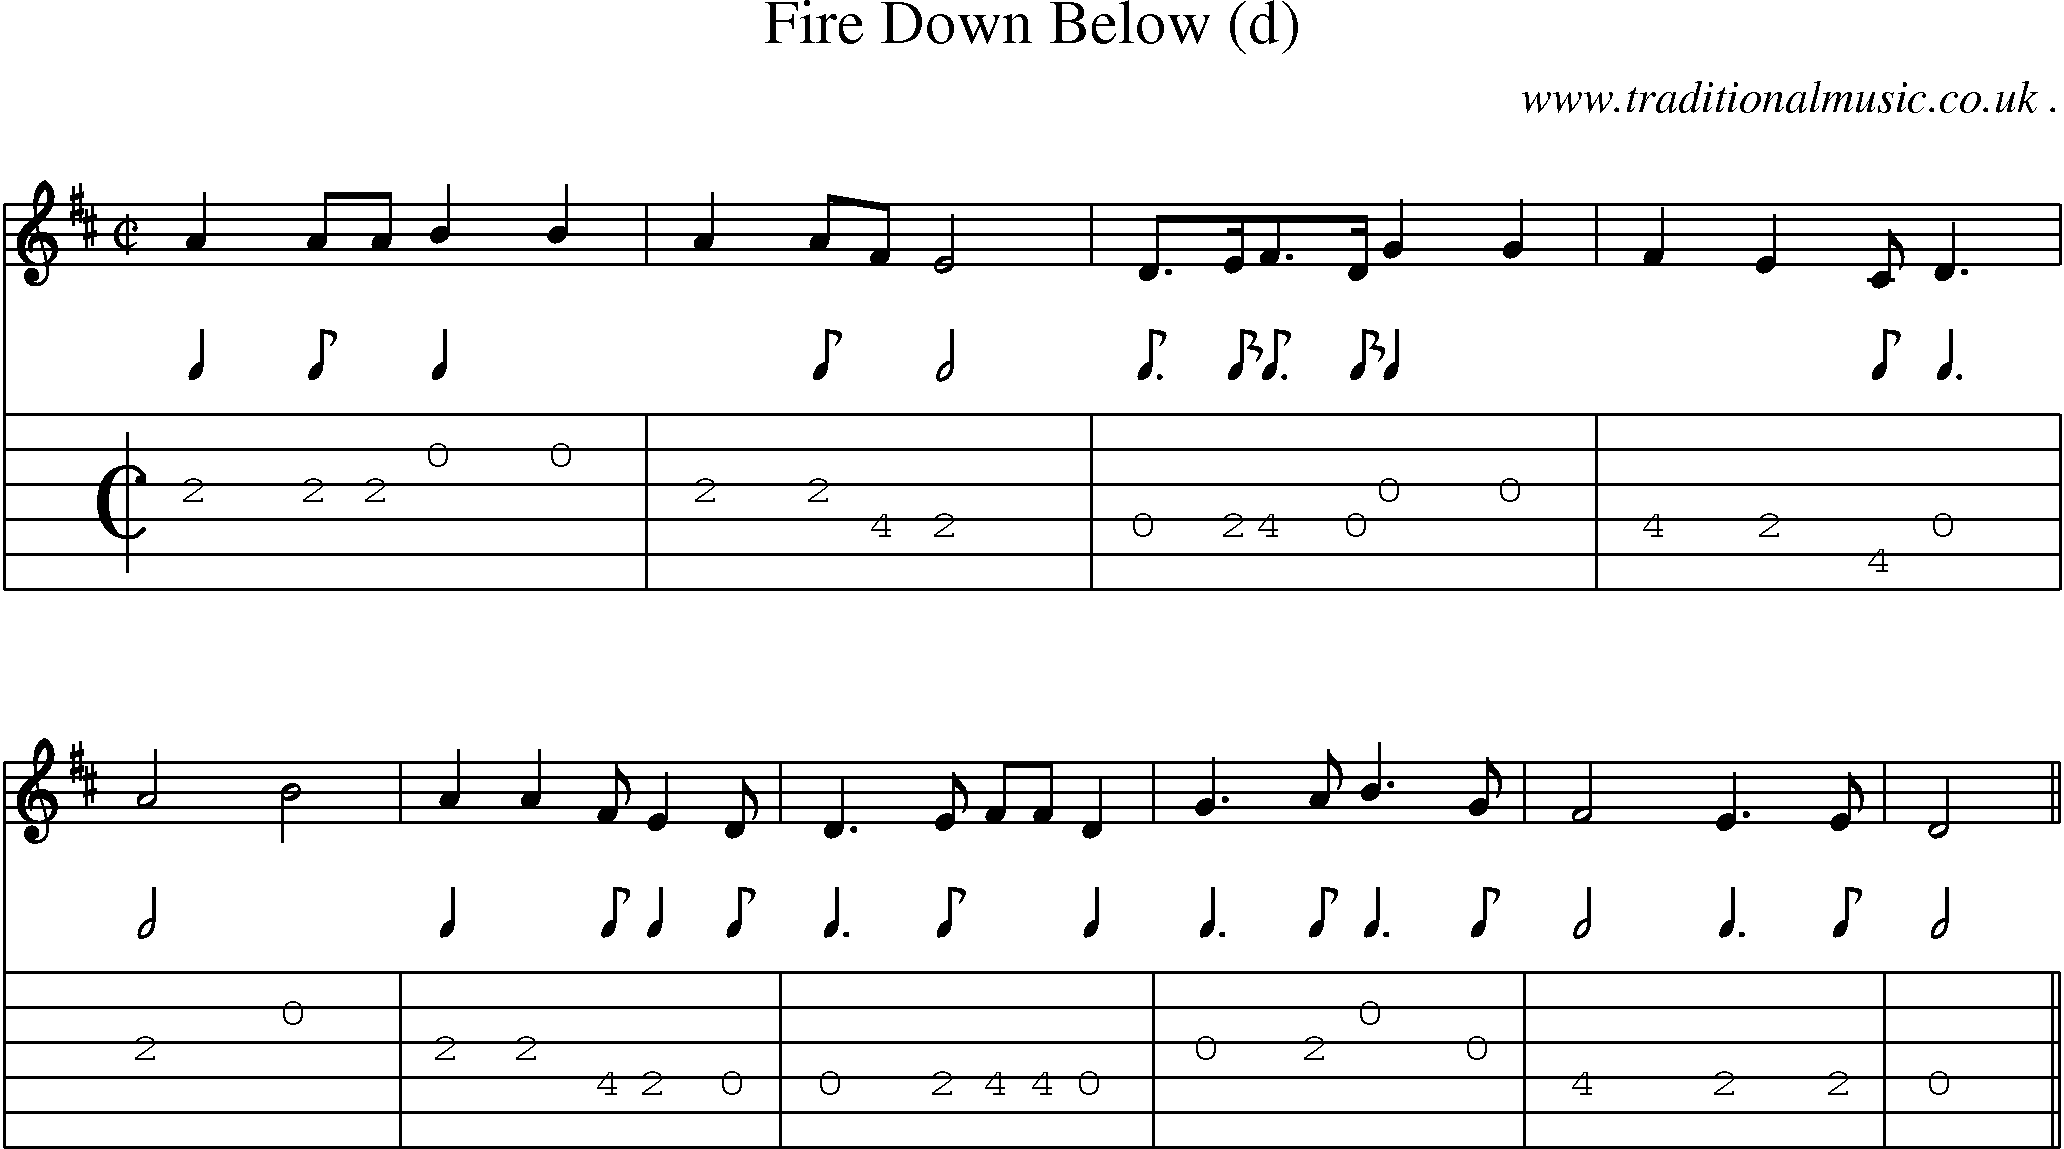 Sheet-Music and Guitar Tabs for Fire Down Below (d)